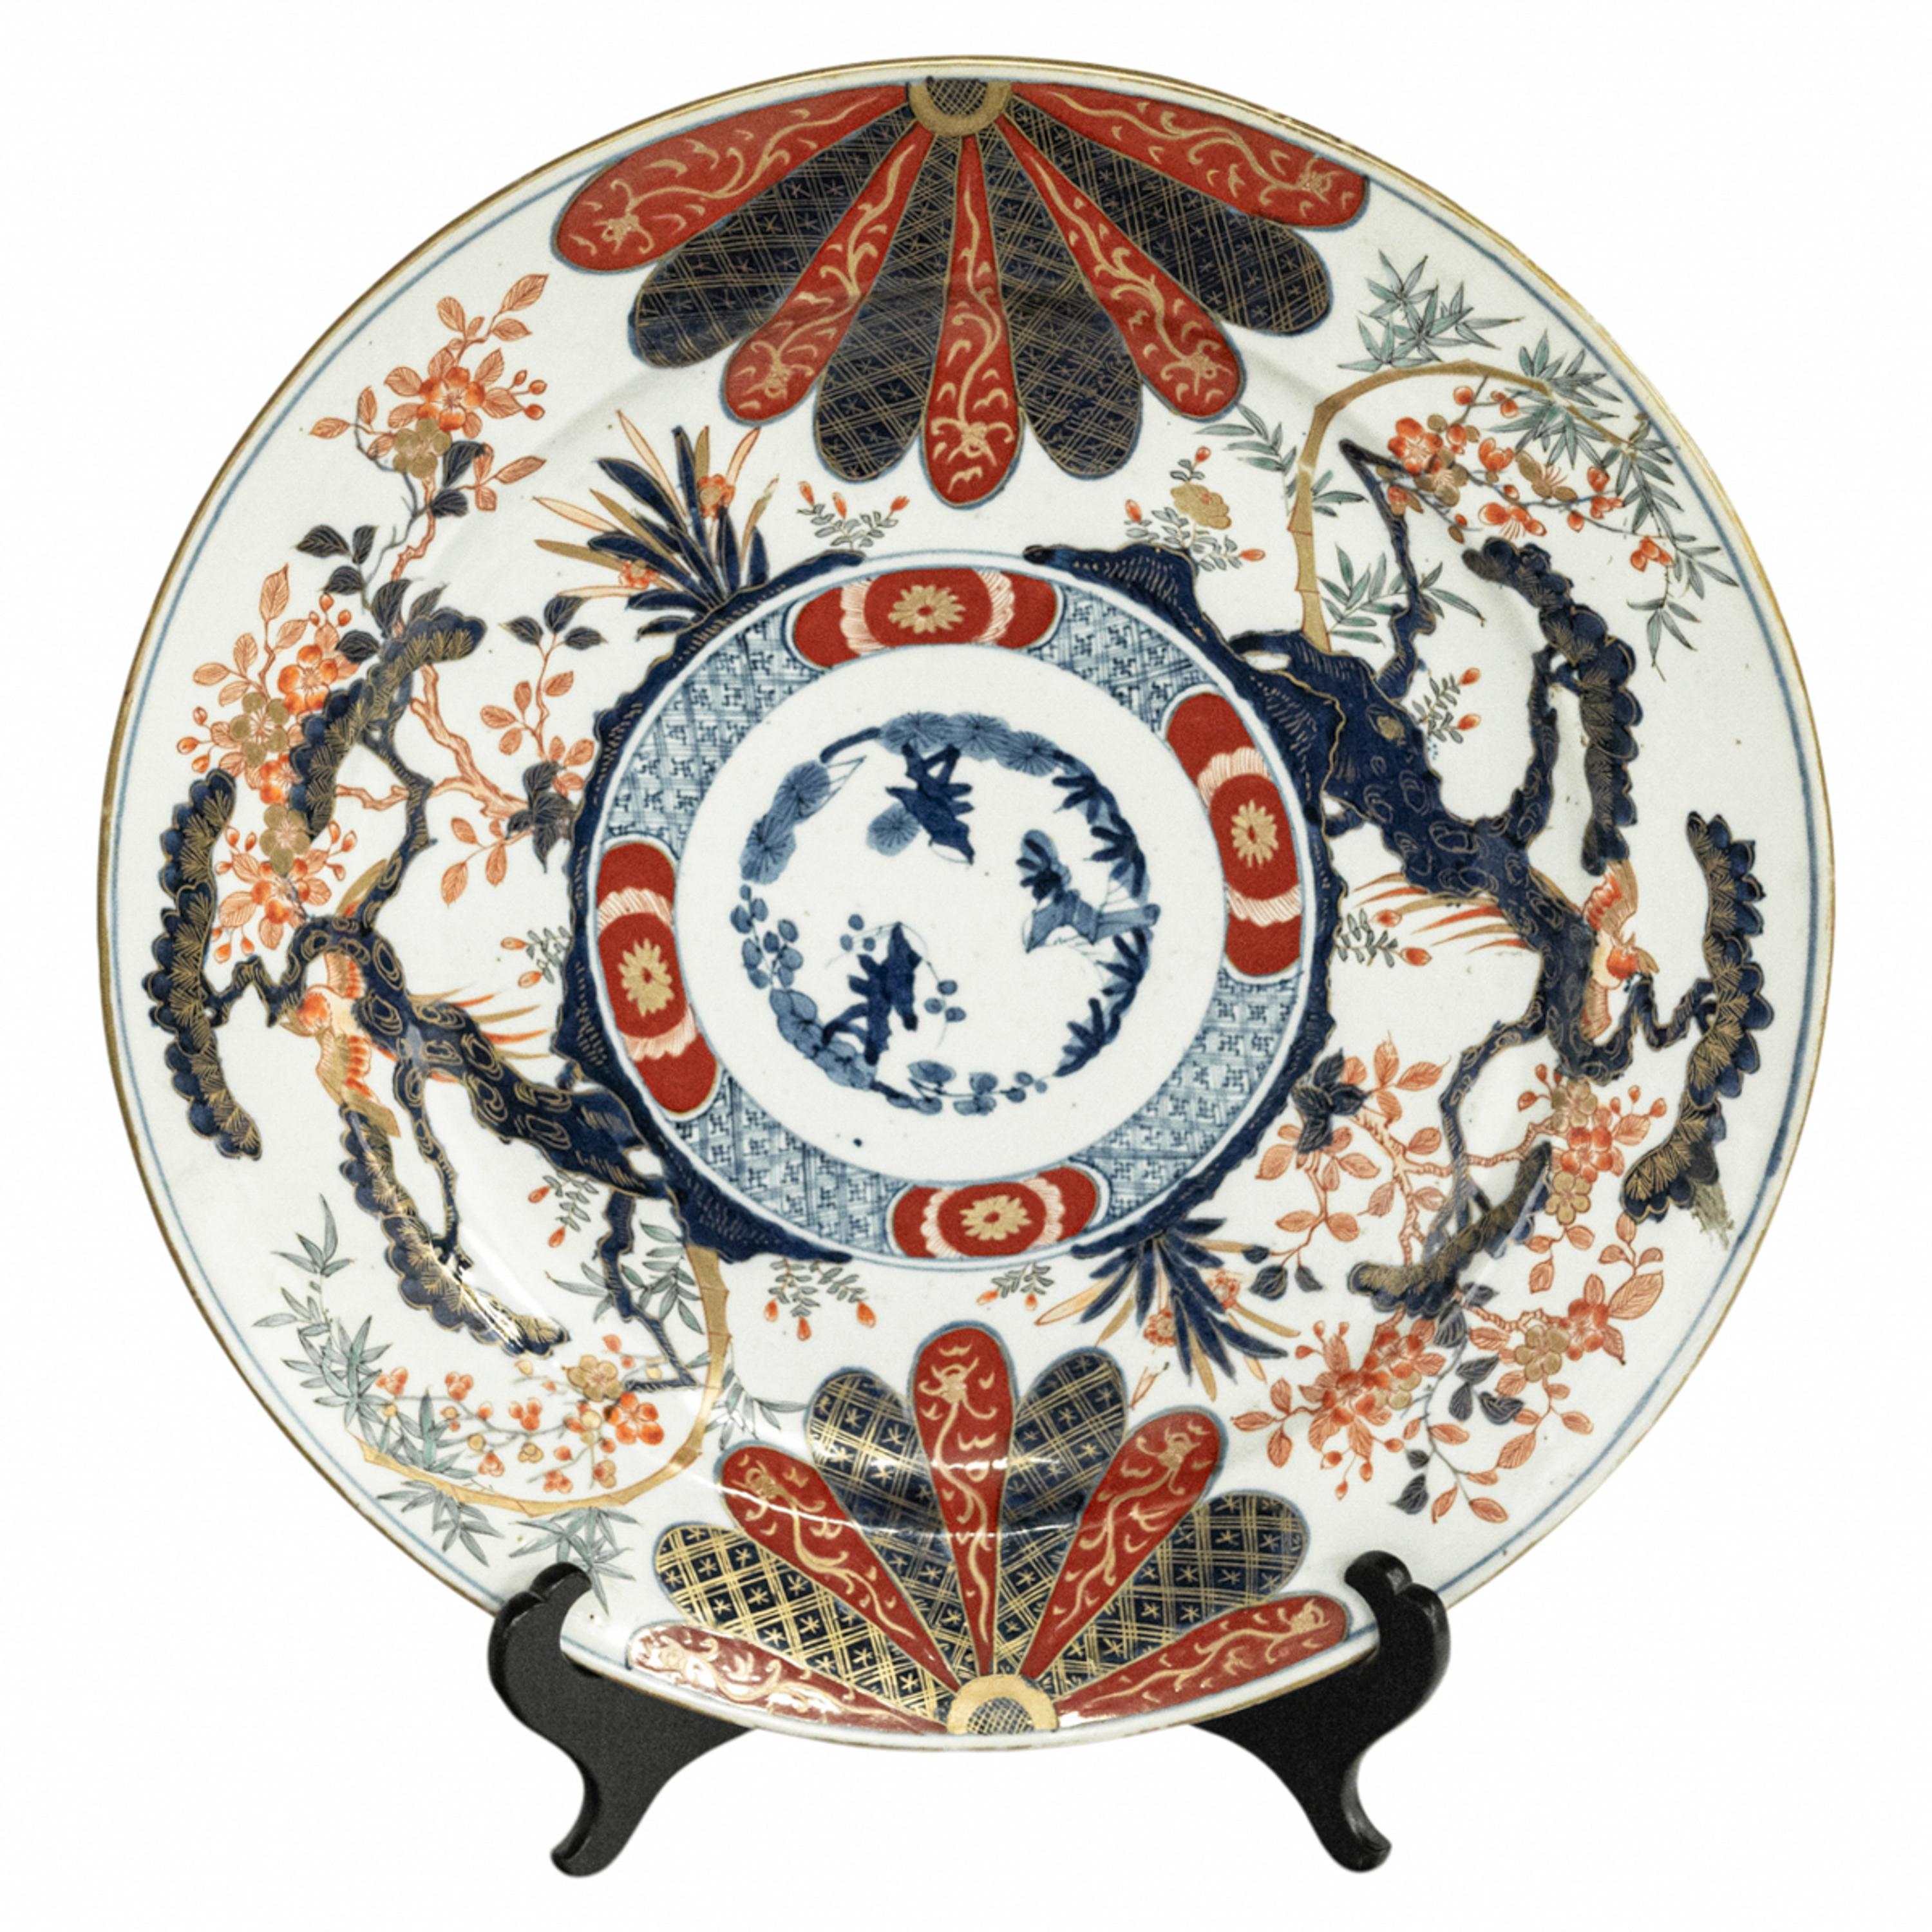 Late 19th Century Monumental Antique Japanese Meiji Period Imari Porcelain Charger Plate 1880 For Sale